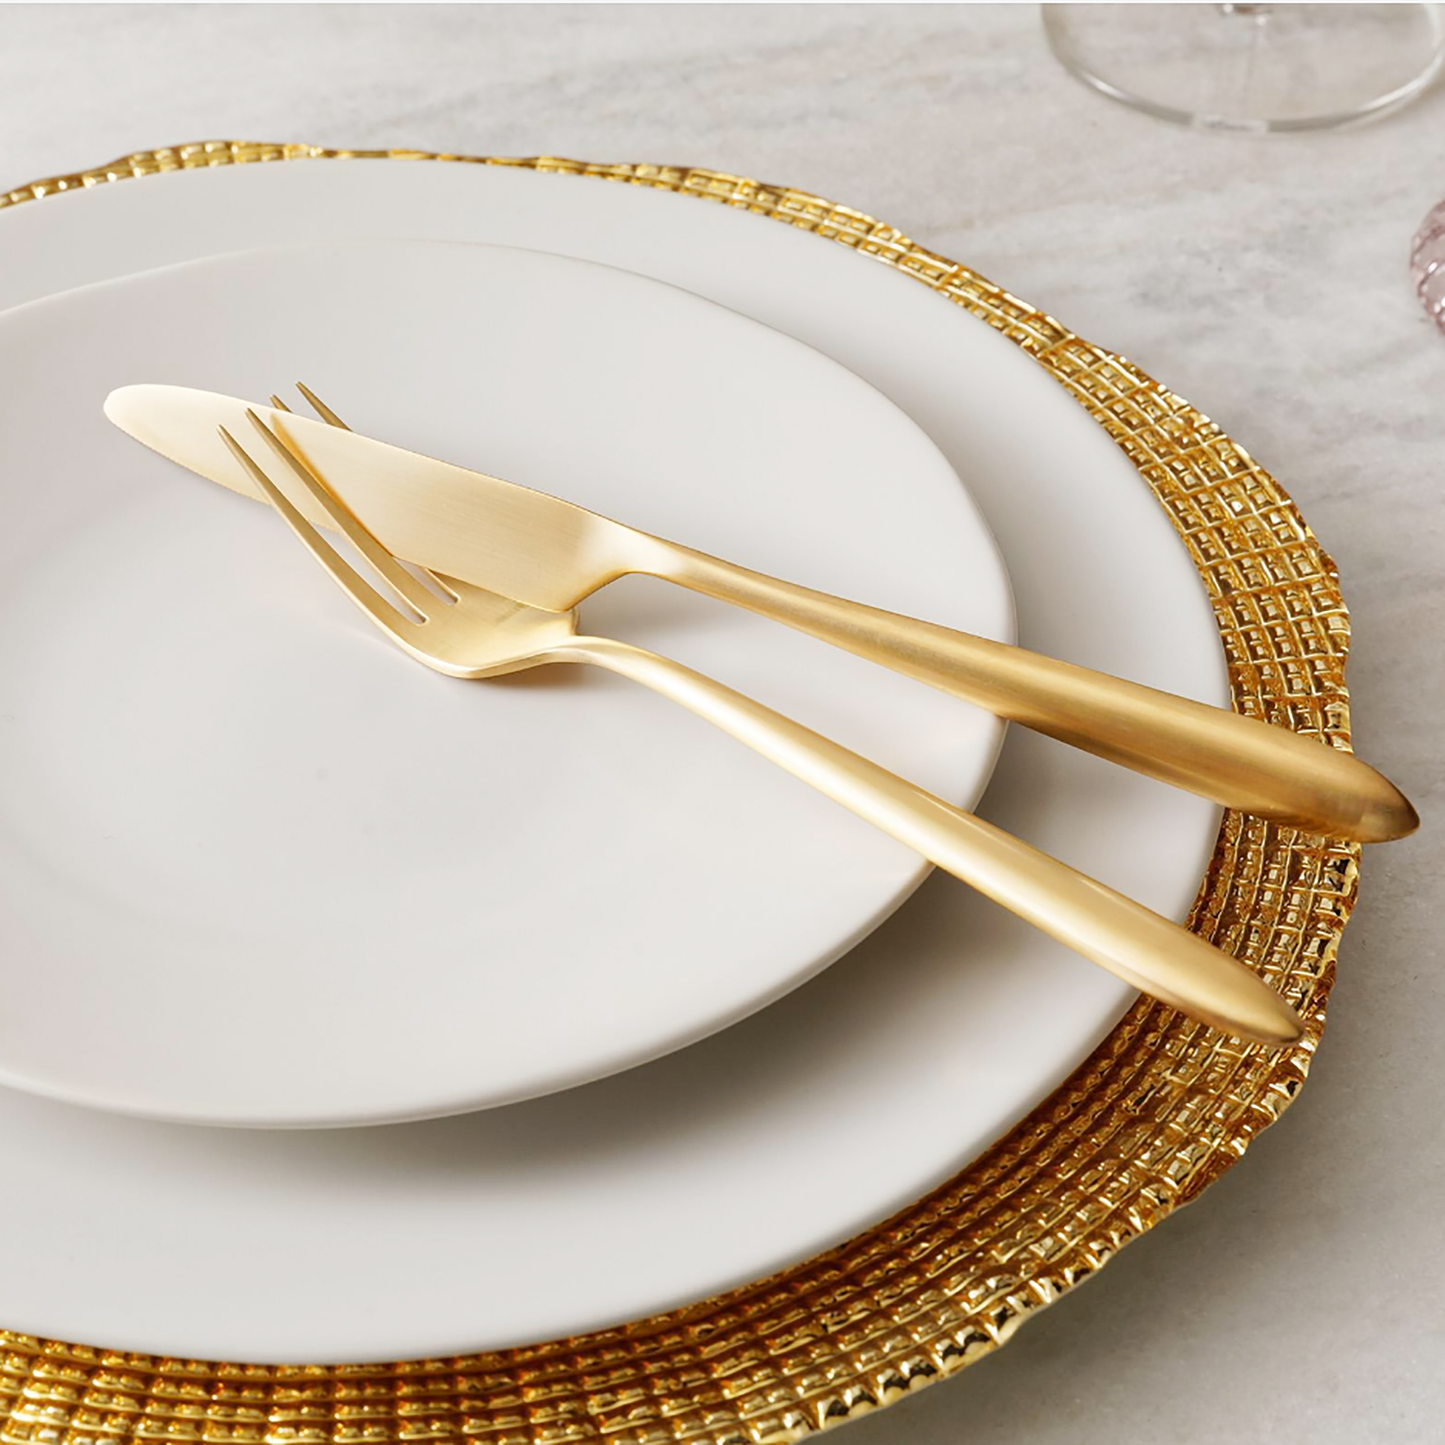 Epic Full Brushed Real Gold Plated 4-Pcs Cutlery Set